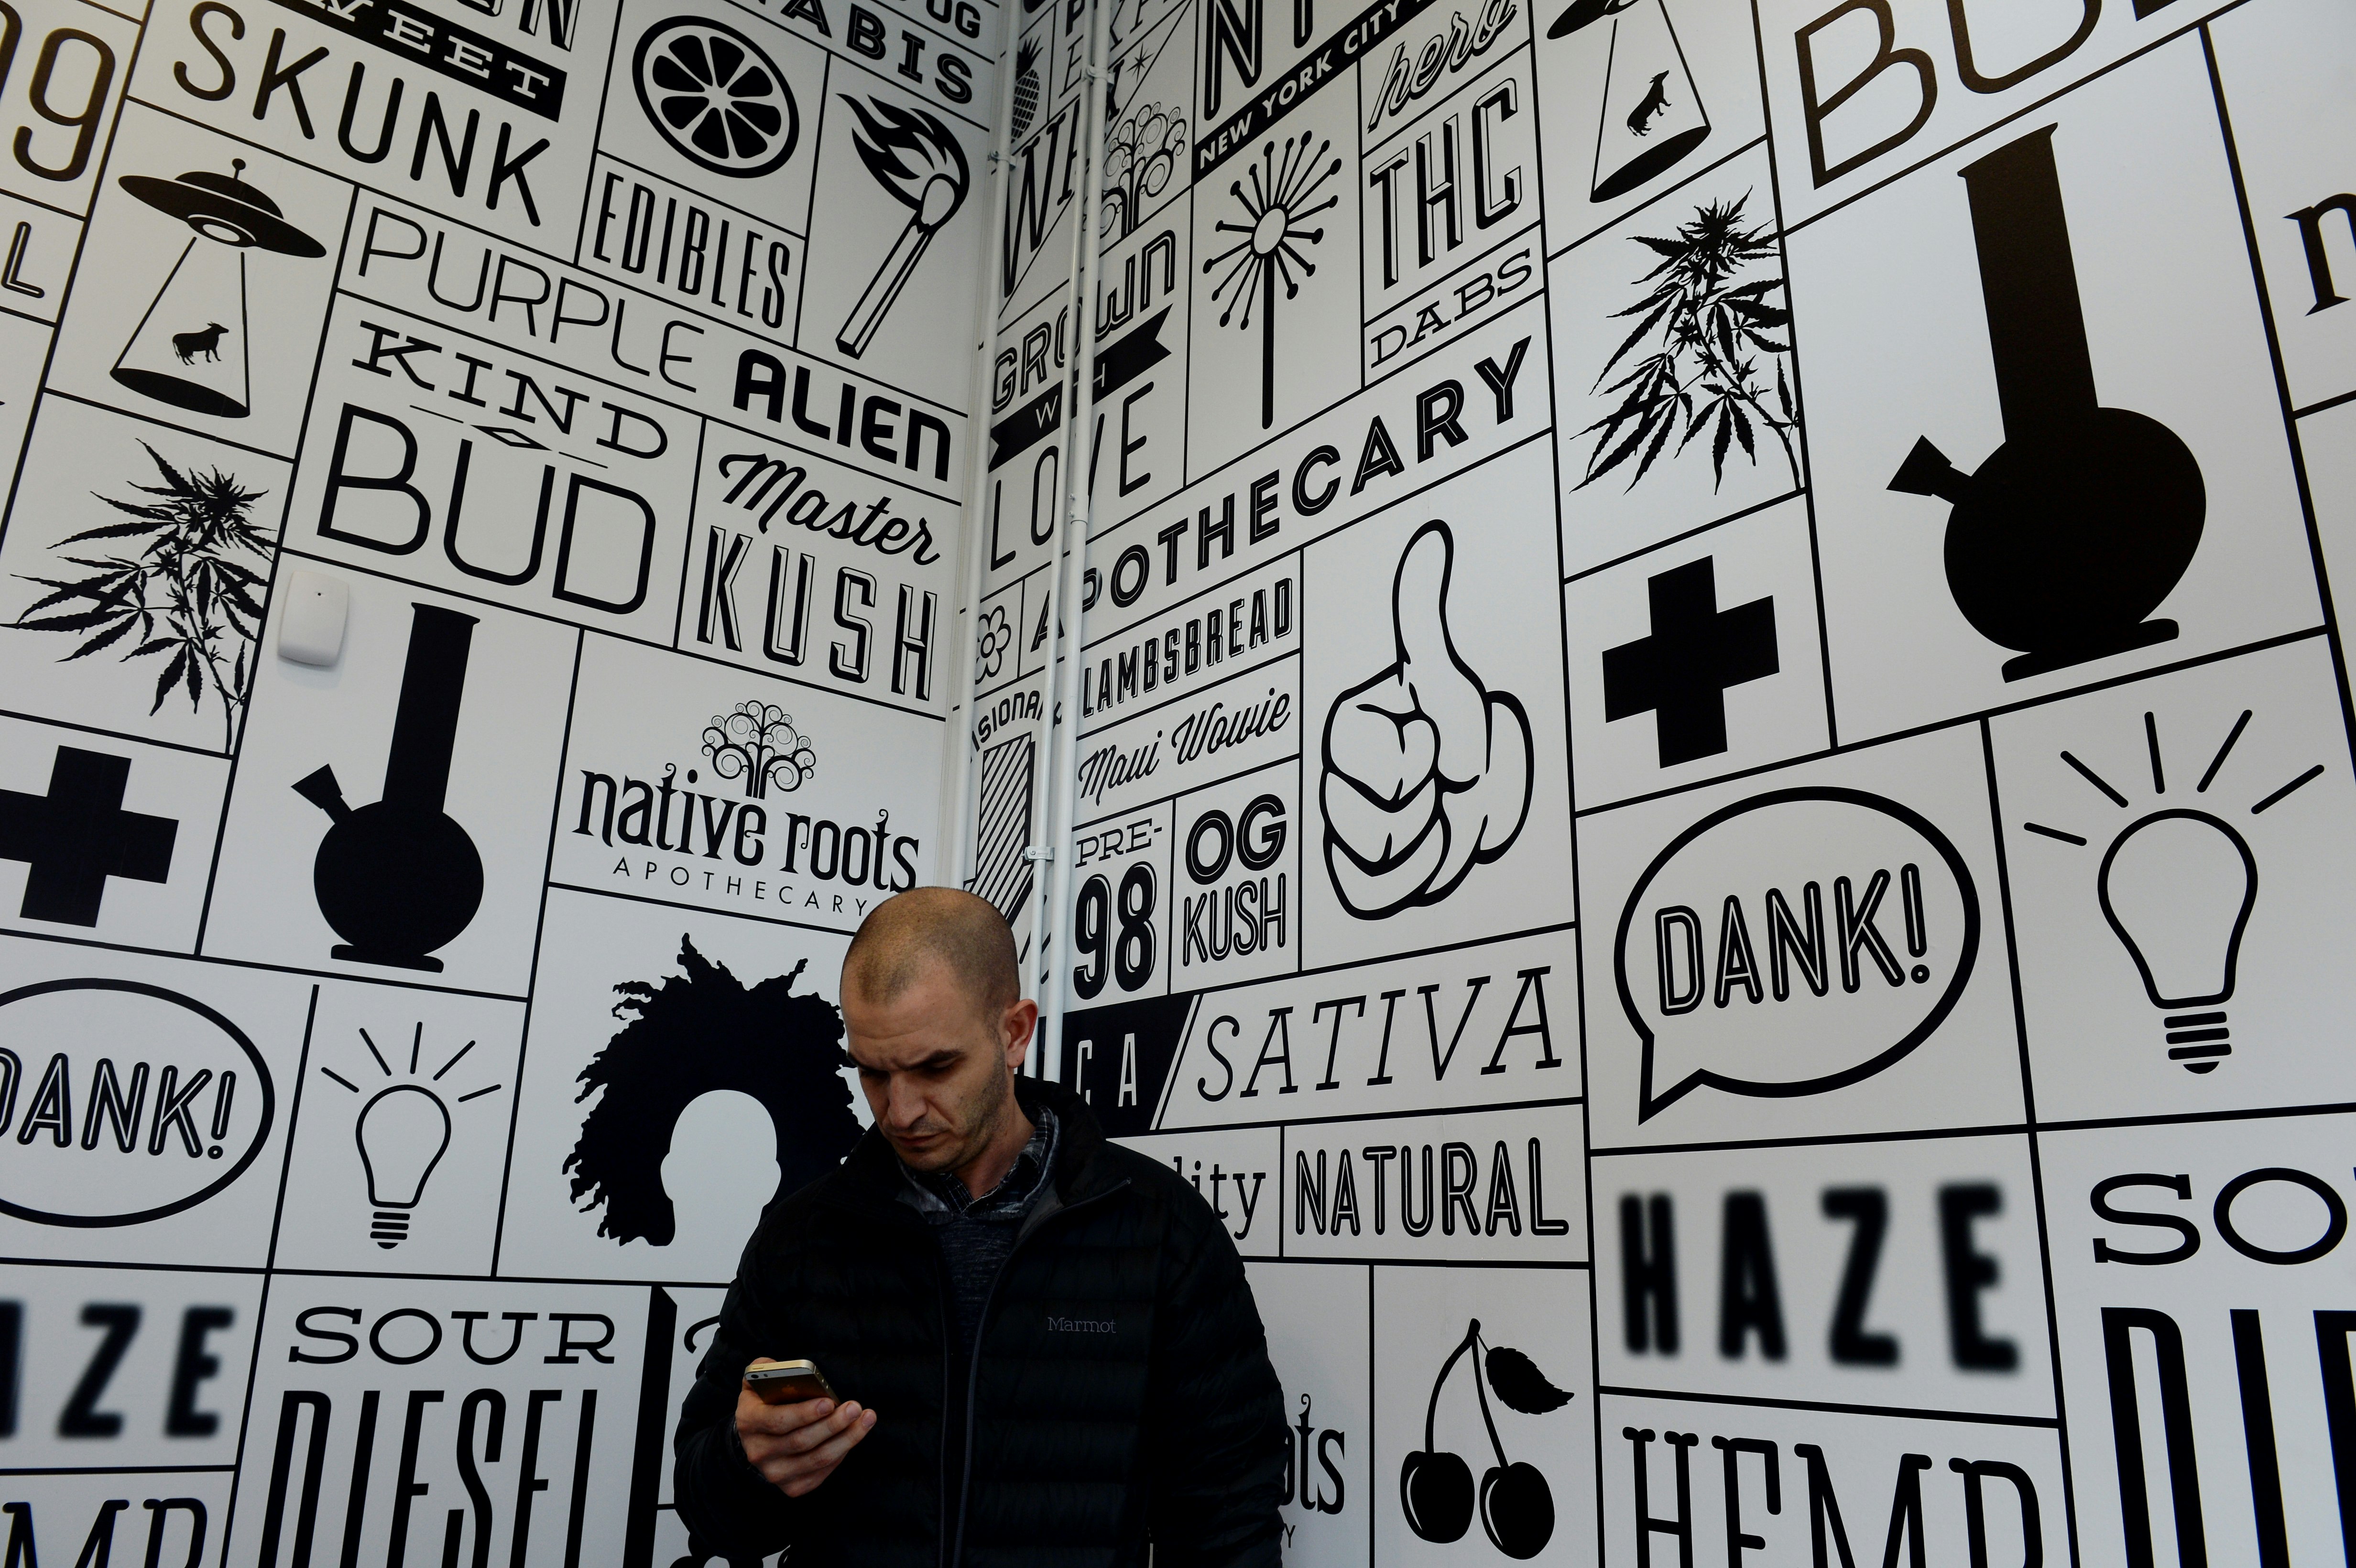 A gentleman in a black pullover looks at his phone while he waits in the lobby of the Native Roots dispensary in Denver, Colorado. Behind him is a large graphic mural with cartoon-style bongs, lightbulbs, flying saucers, matches, and slogans like "Dank!" and "Sour Diesel"